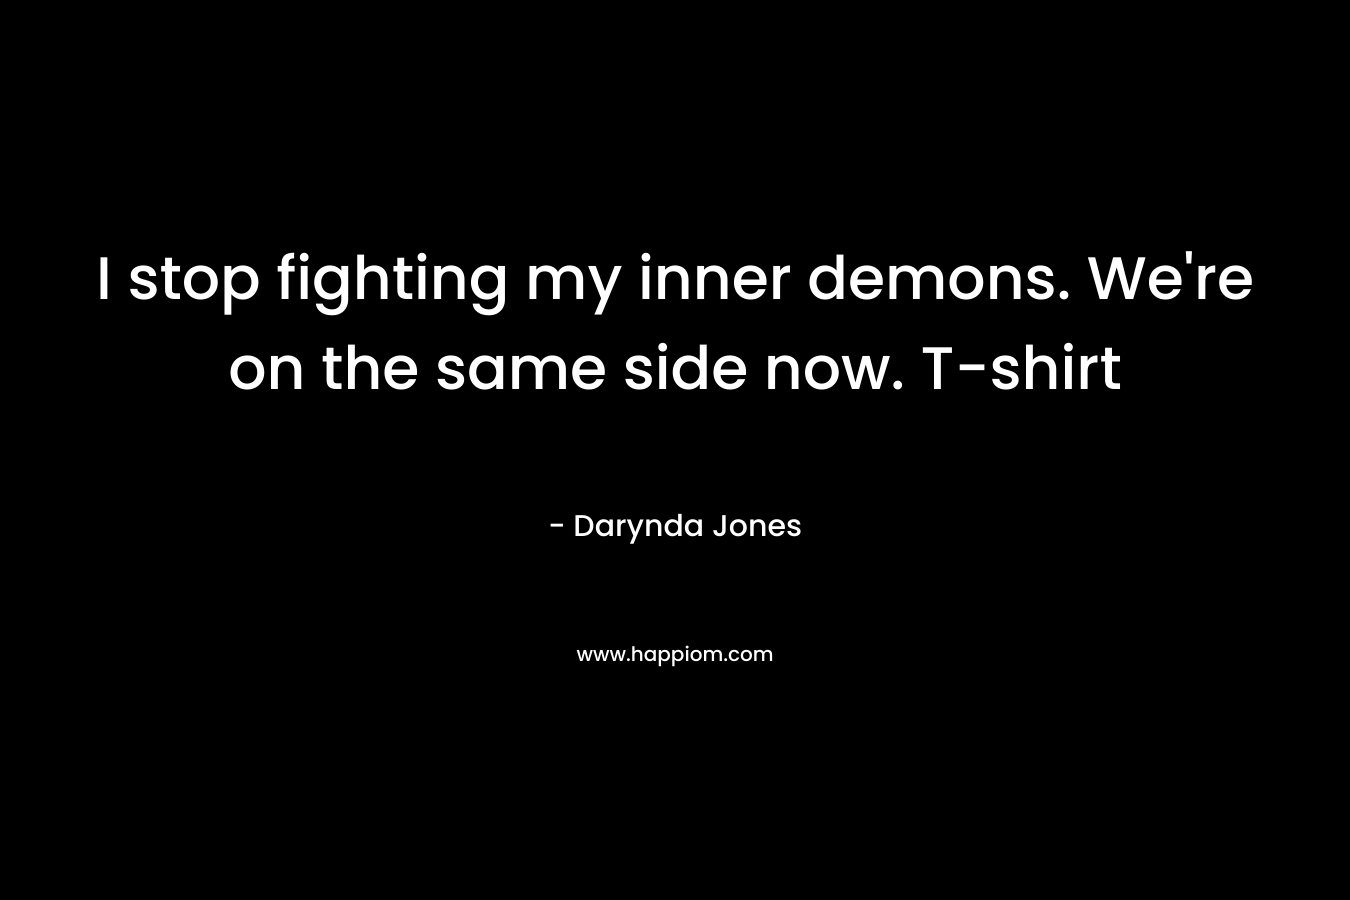 I stop fighting my inner demons. We're on the same side now. T-shirt